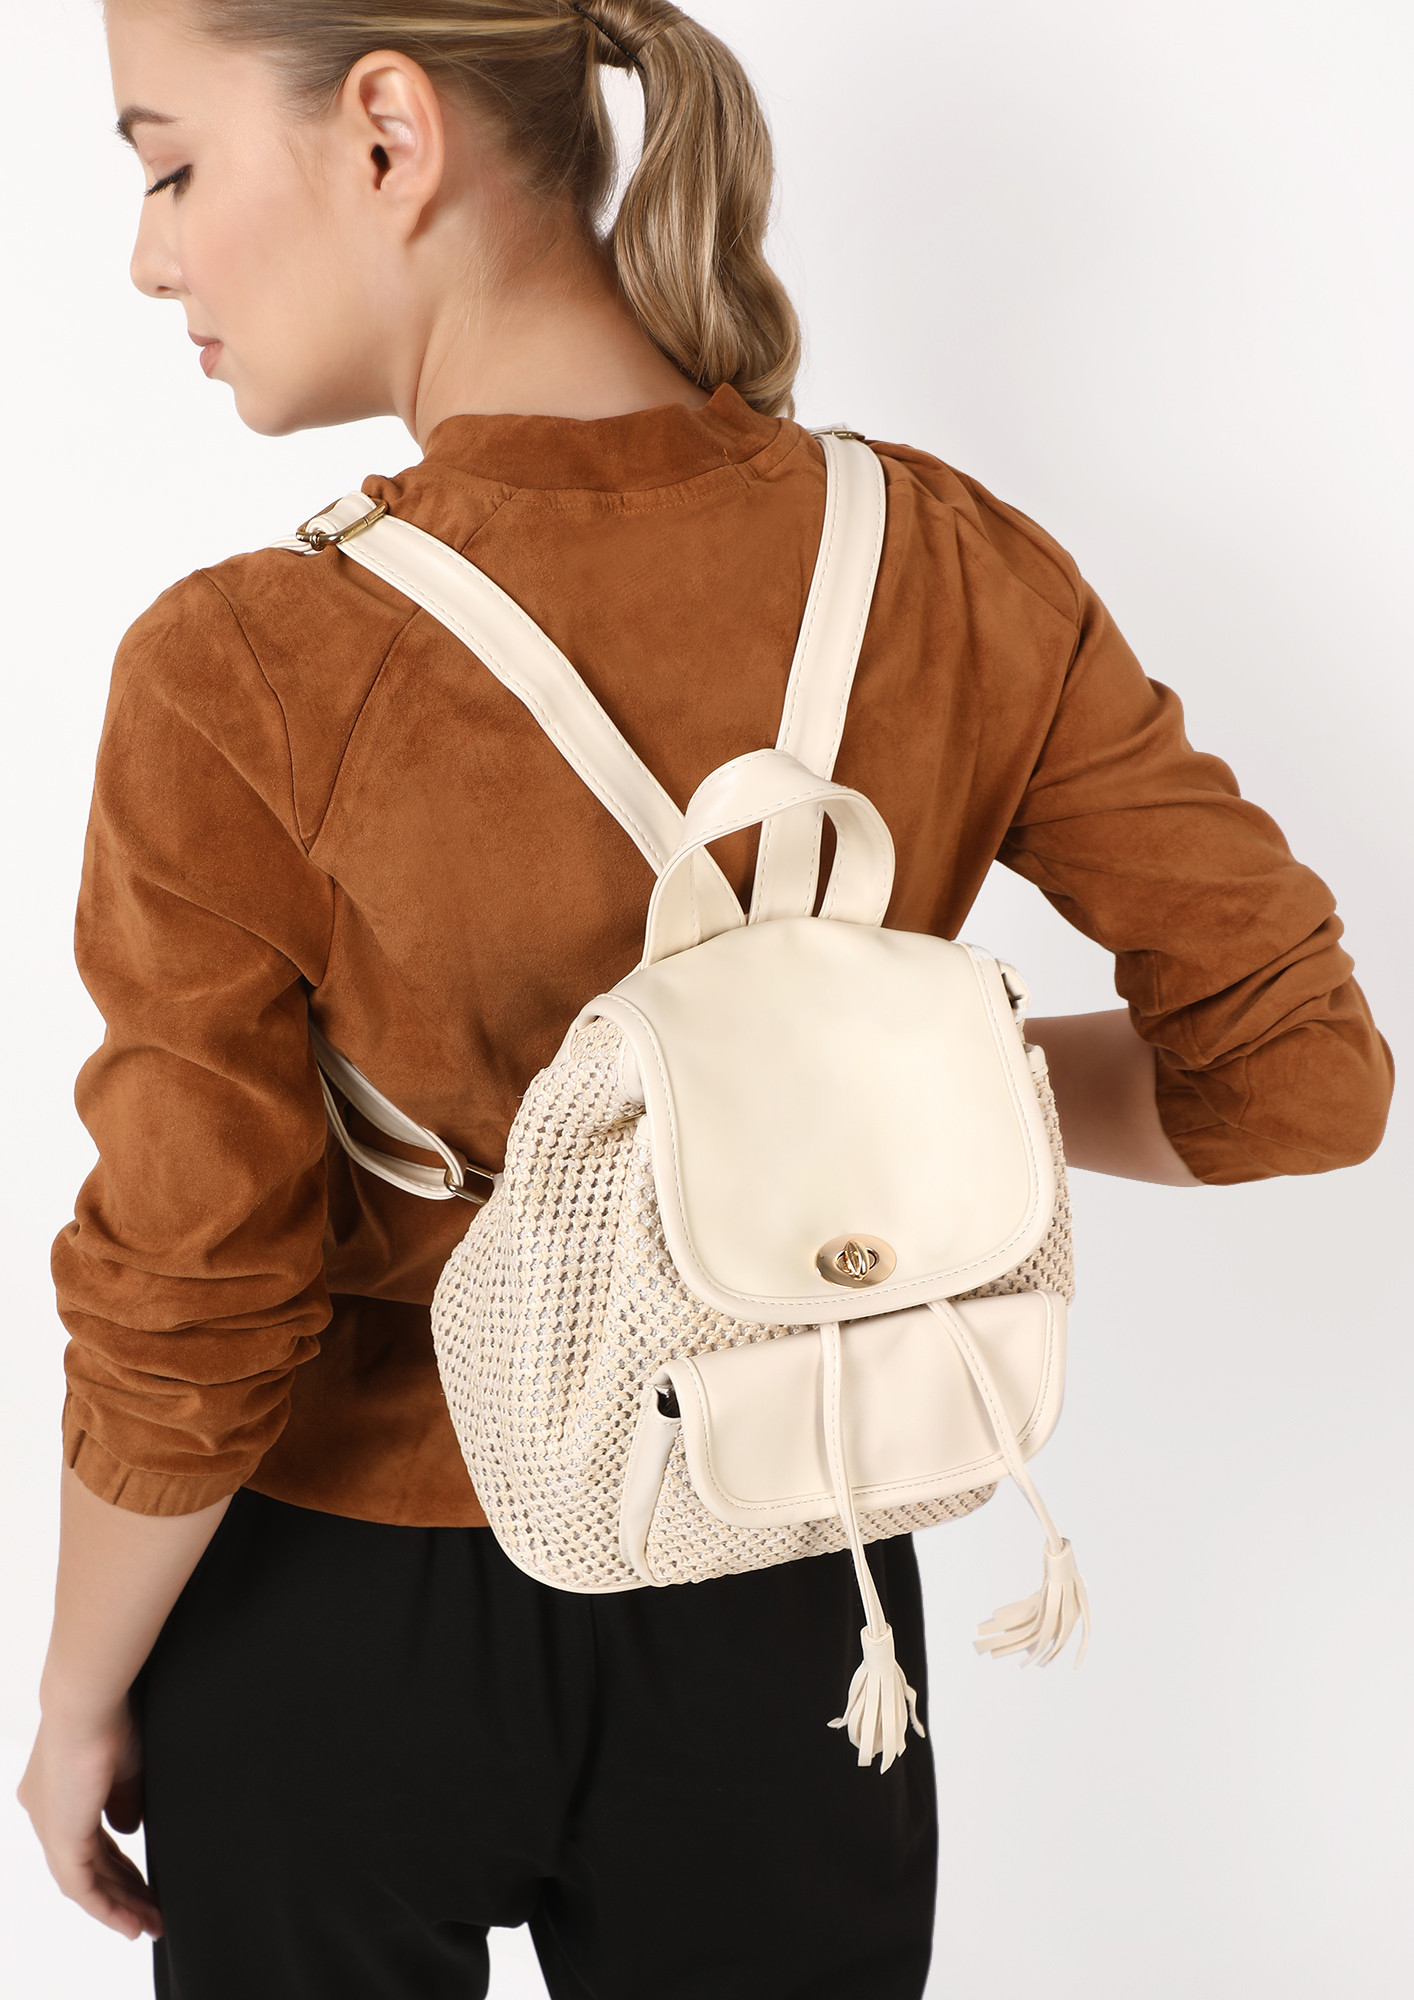 SWEETLY FOREVER WHITE BACKPACK